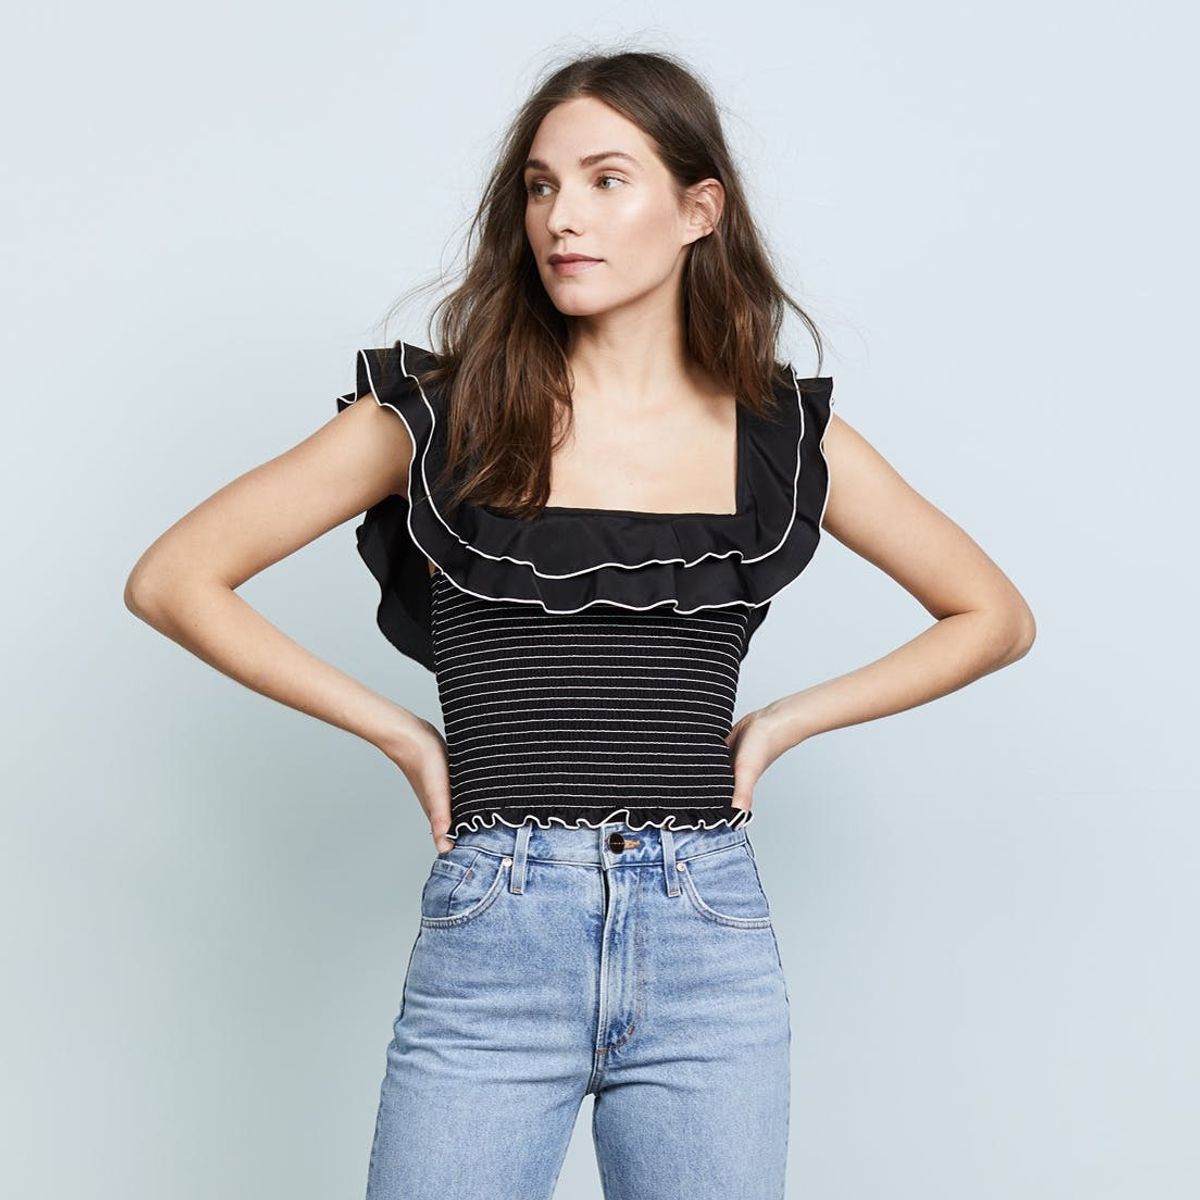 The Summer-Approved Top We’re Already Seeing Everywhere